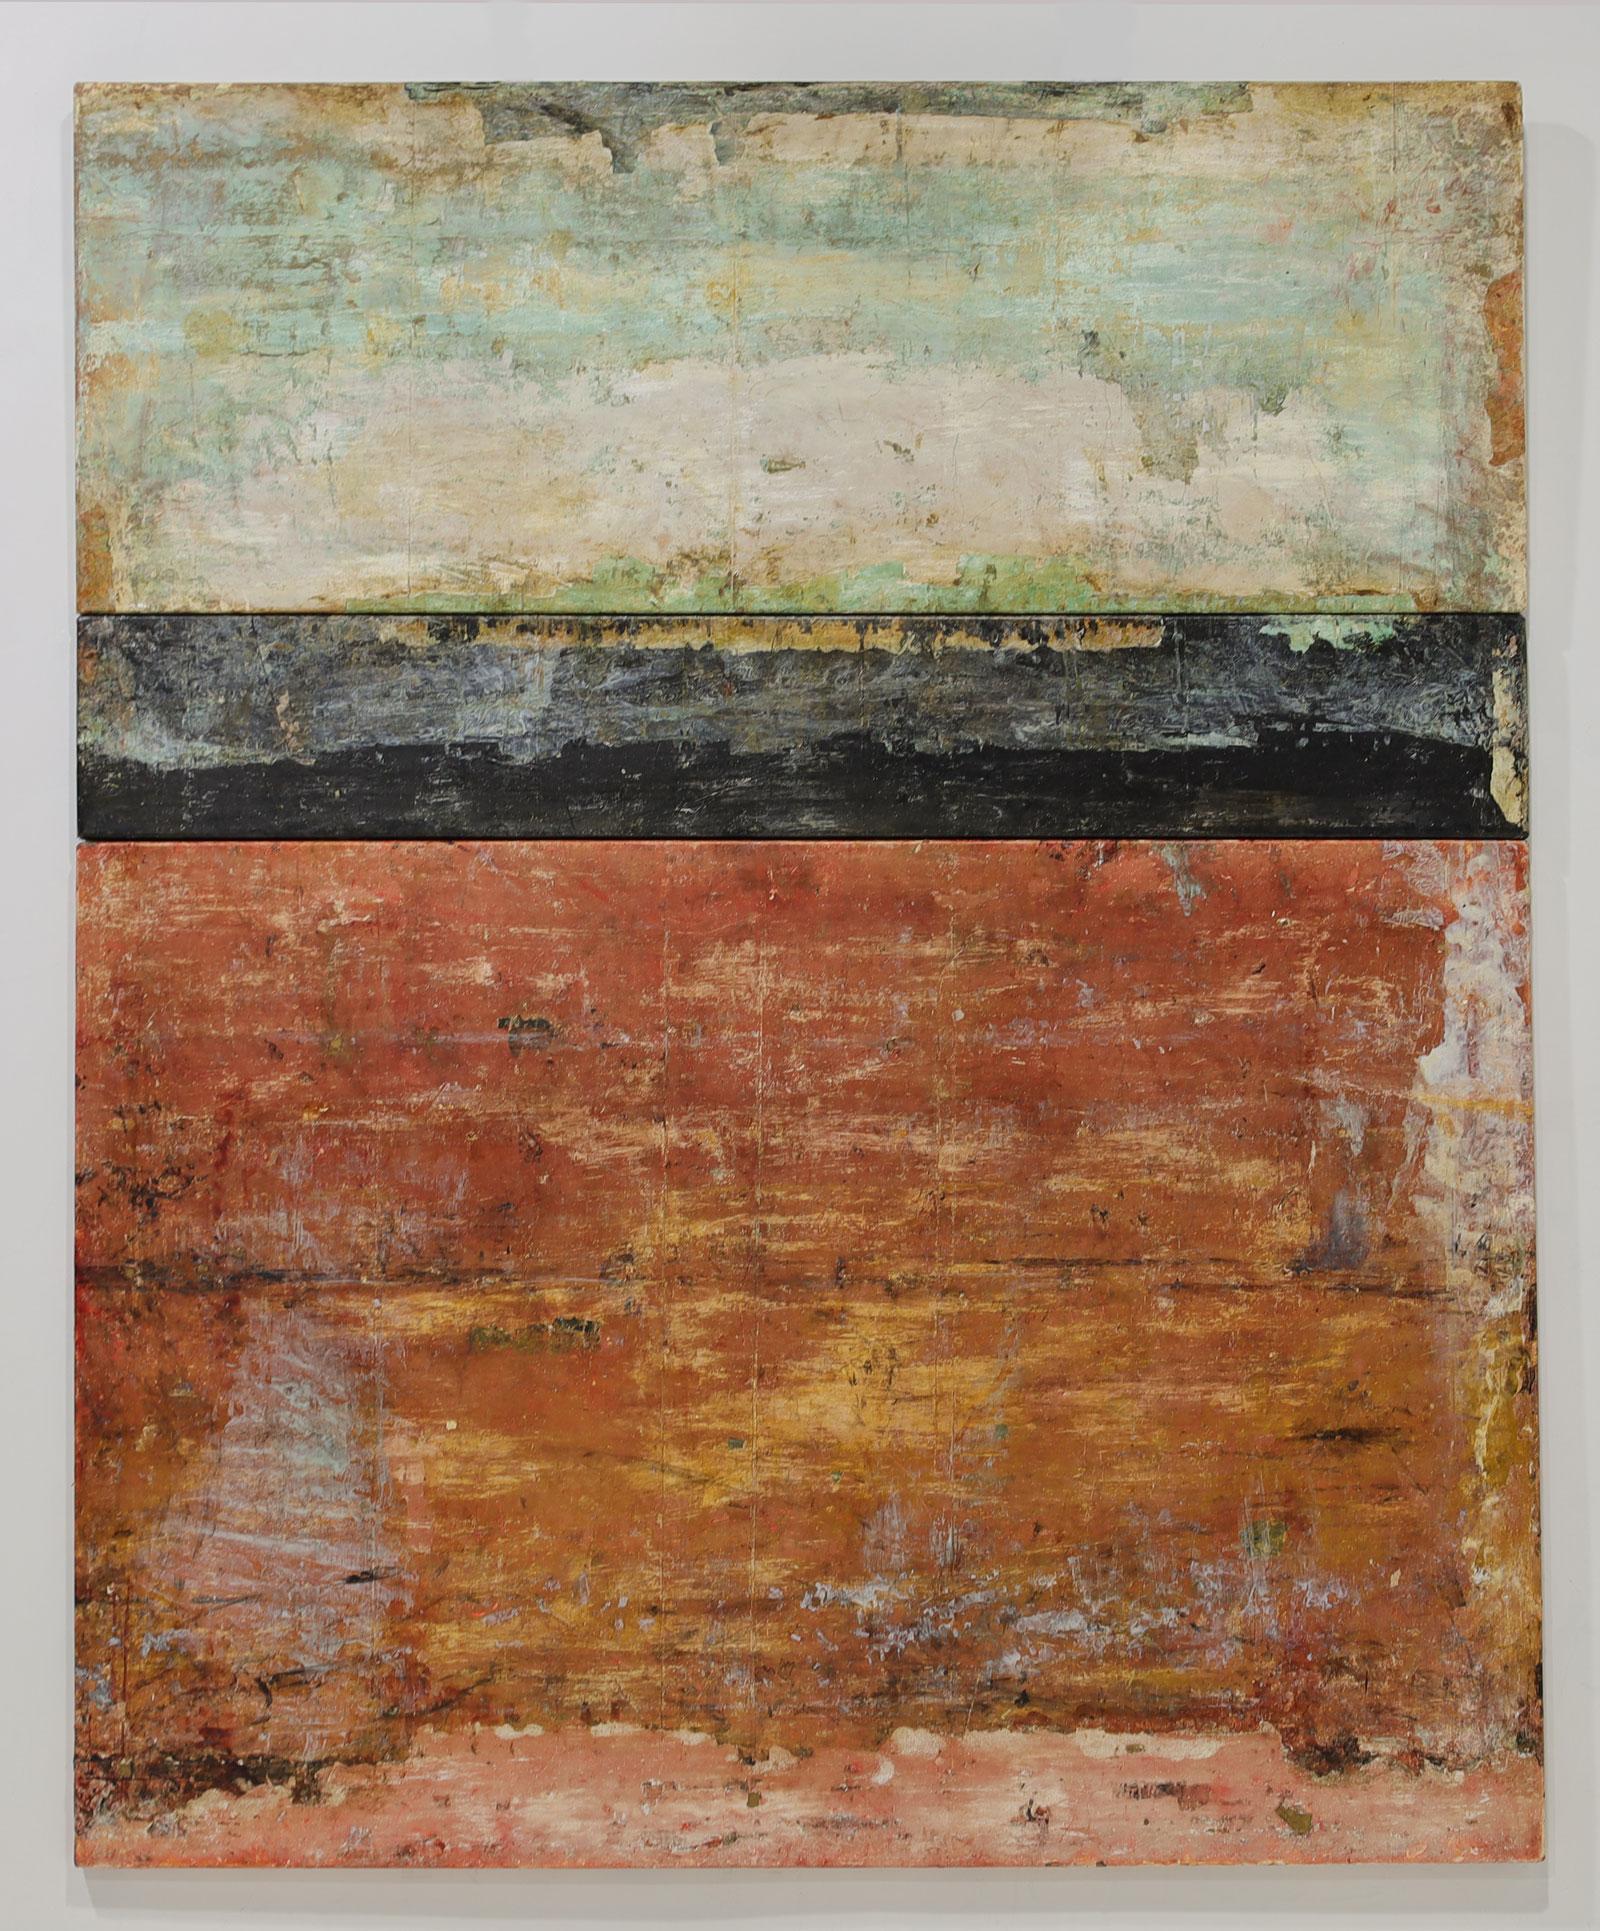 Marcia Myers was an American painter best known for her large-scale Color Field abstractions. Emulating the traditional fresco painting techniques of ancient Rome, she used several layers of marble dust, acrylic varnish, as well as historical